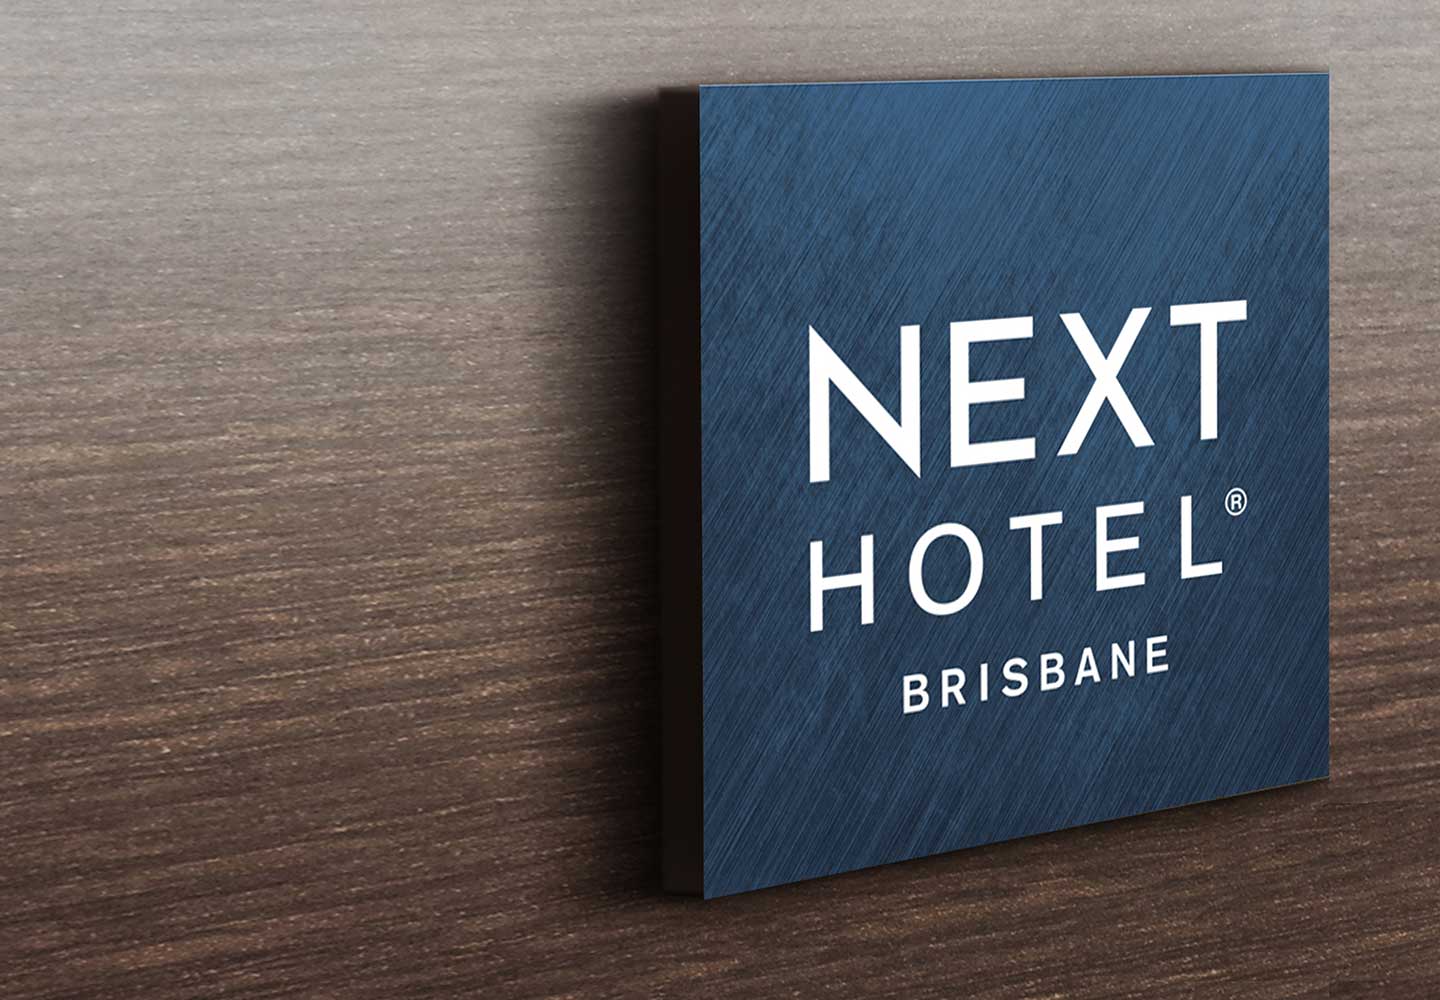 Brand Consultancy in Hospitality Industry. Logo design for Next Hotel.